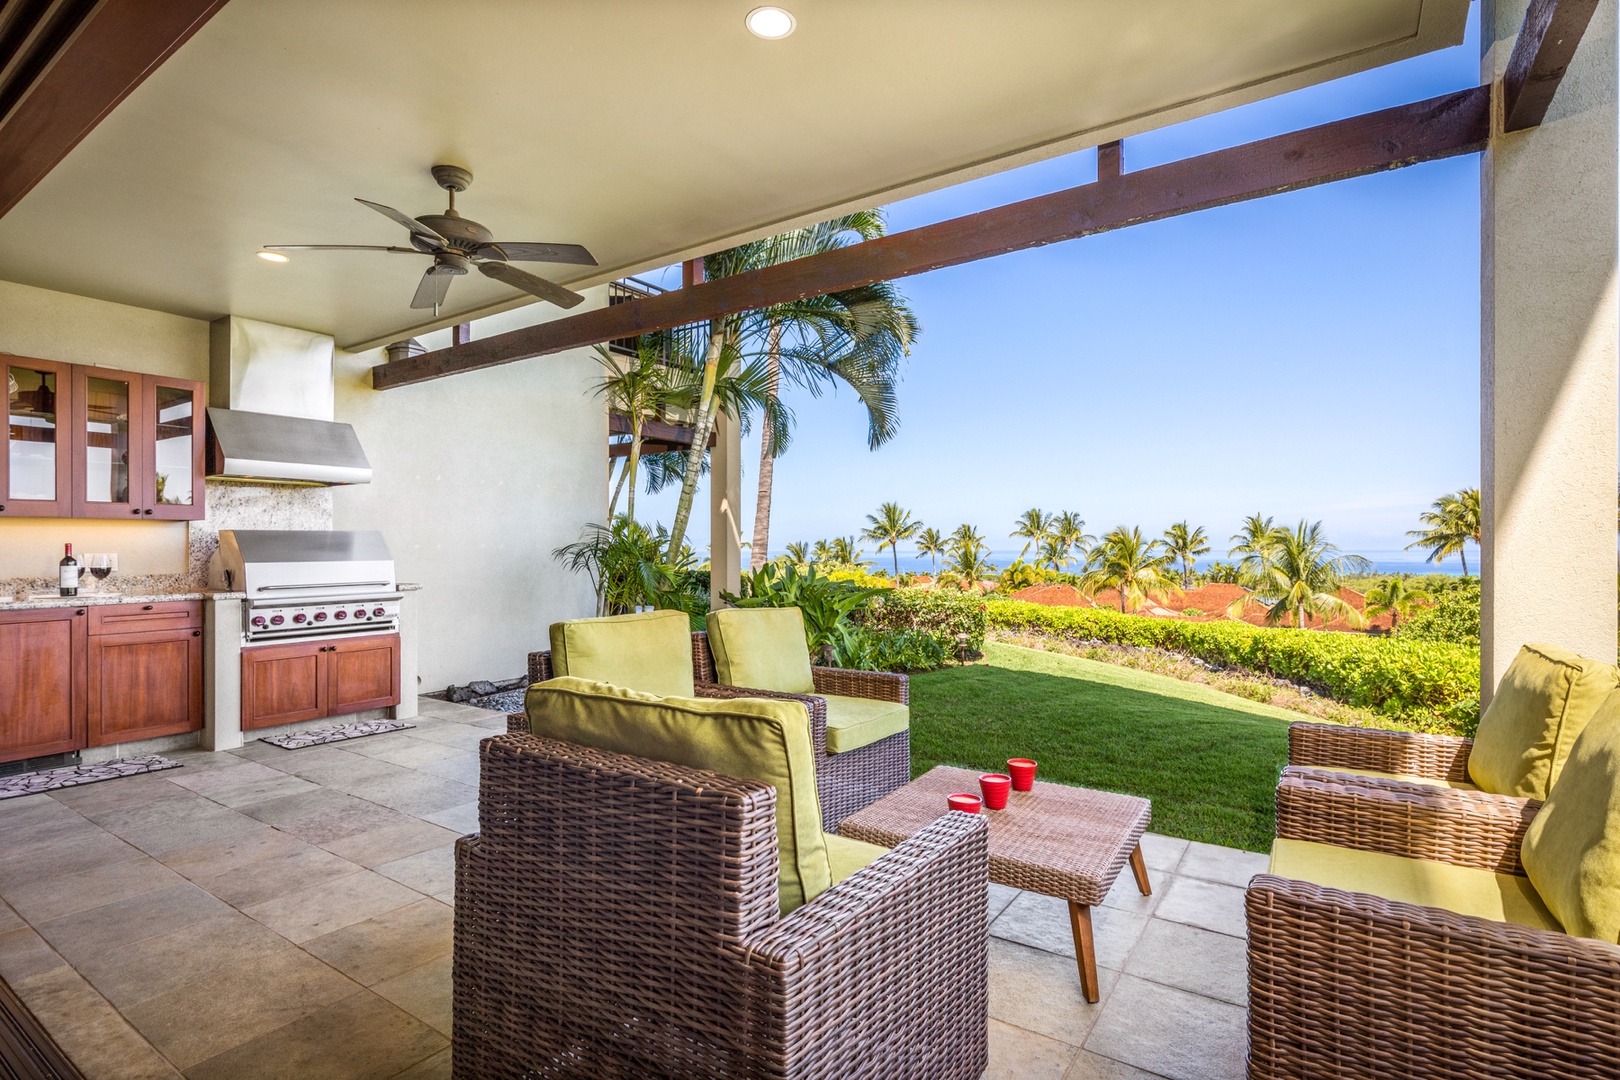 Kailua Kona Vacation Rentals, 3BD Hainoa Villa (2907C) at Four Seasons Resort at Hualalai - Generous lanai with BBQ grill, ocean views & a private grassy lawn, perfect for families and anyone who enjoys ample outdoor living space.